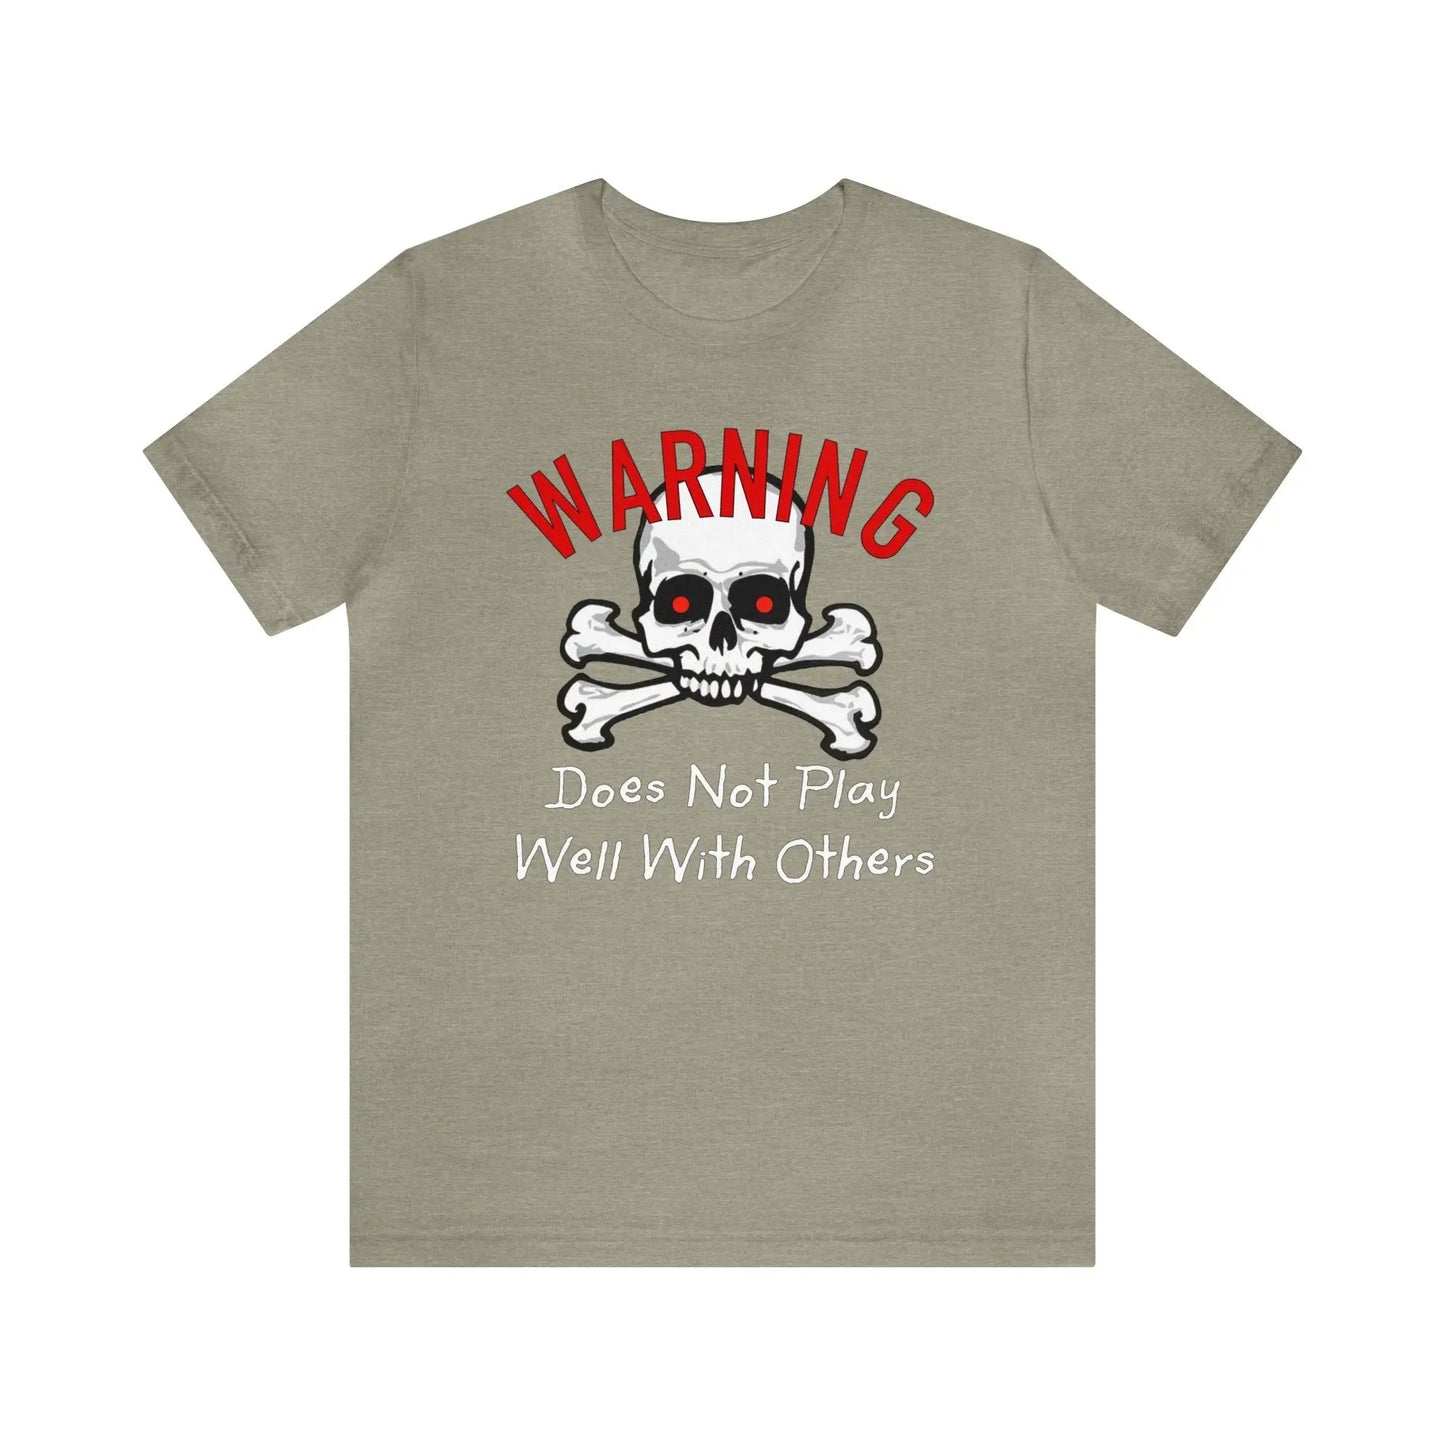 Does Not Play Well With Others Men's Tee - Wicked Tees